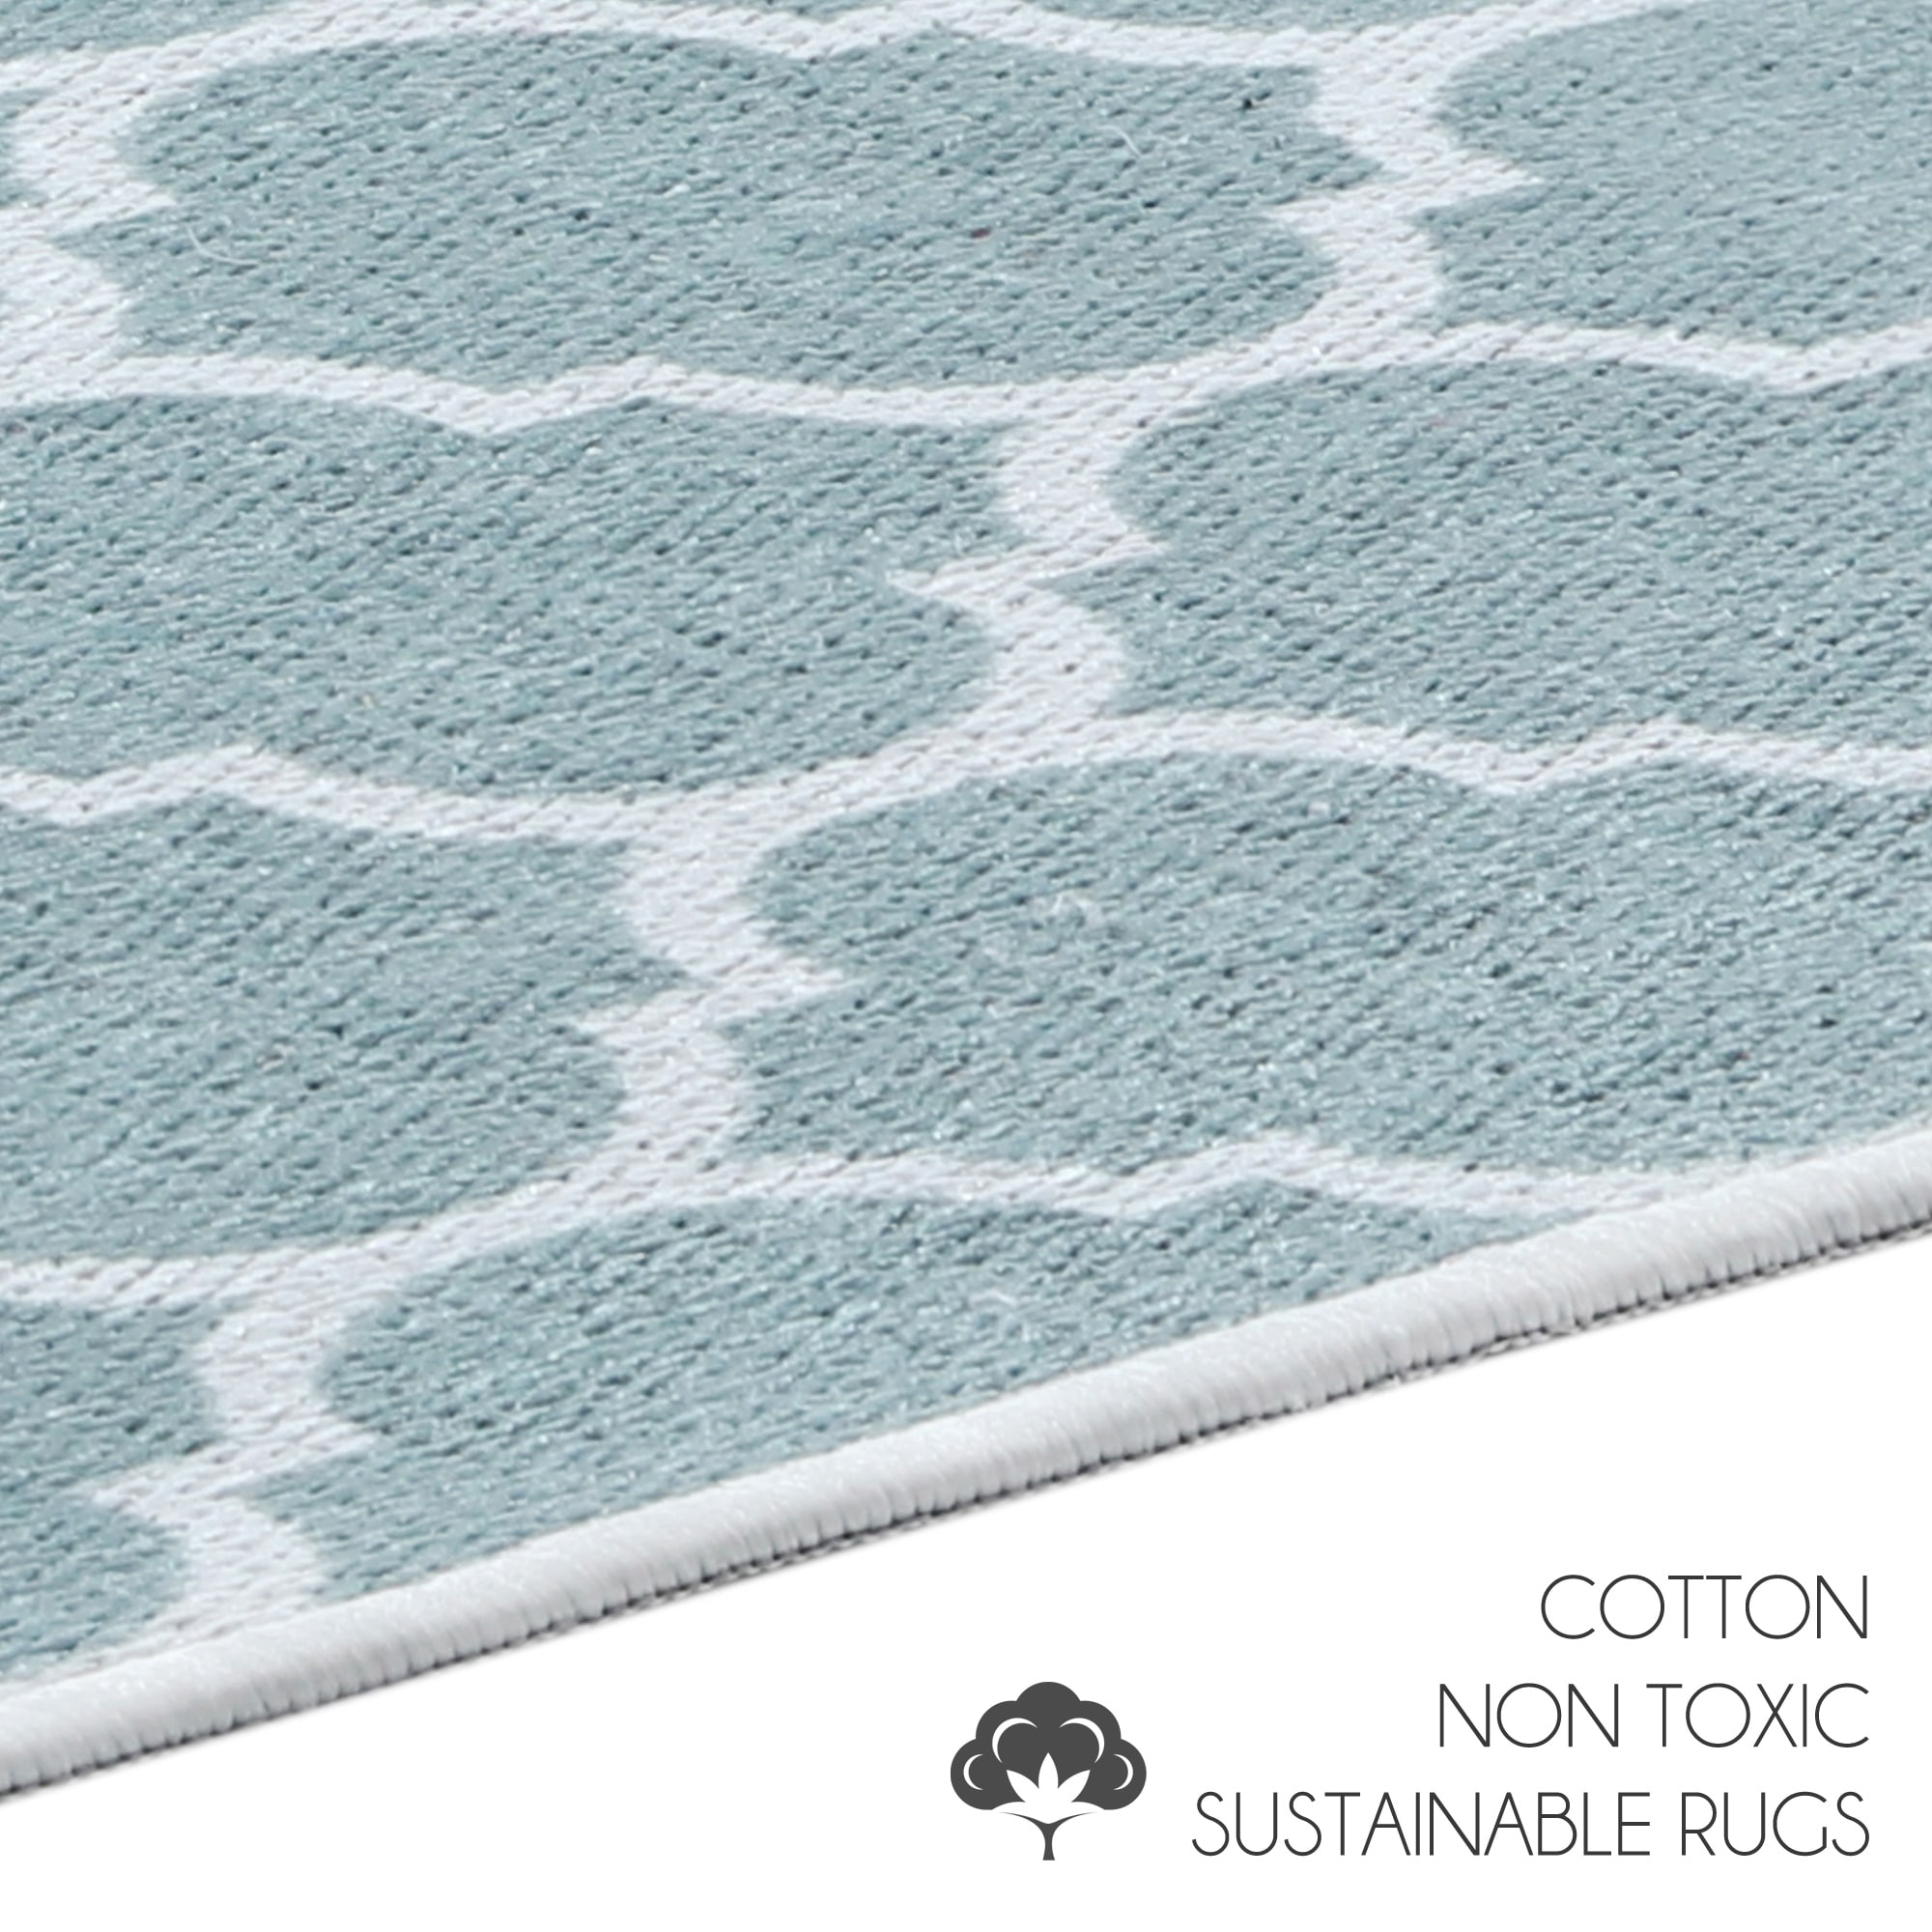 SussexHome Non-skid Ultra-thin Blended Cotton Runner Rug - 20 x 59 - On  Sale - Bed Bath & Beyond - 32433191